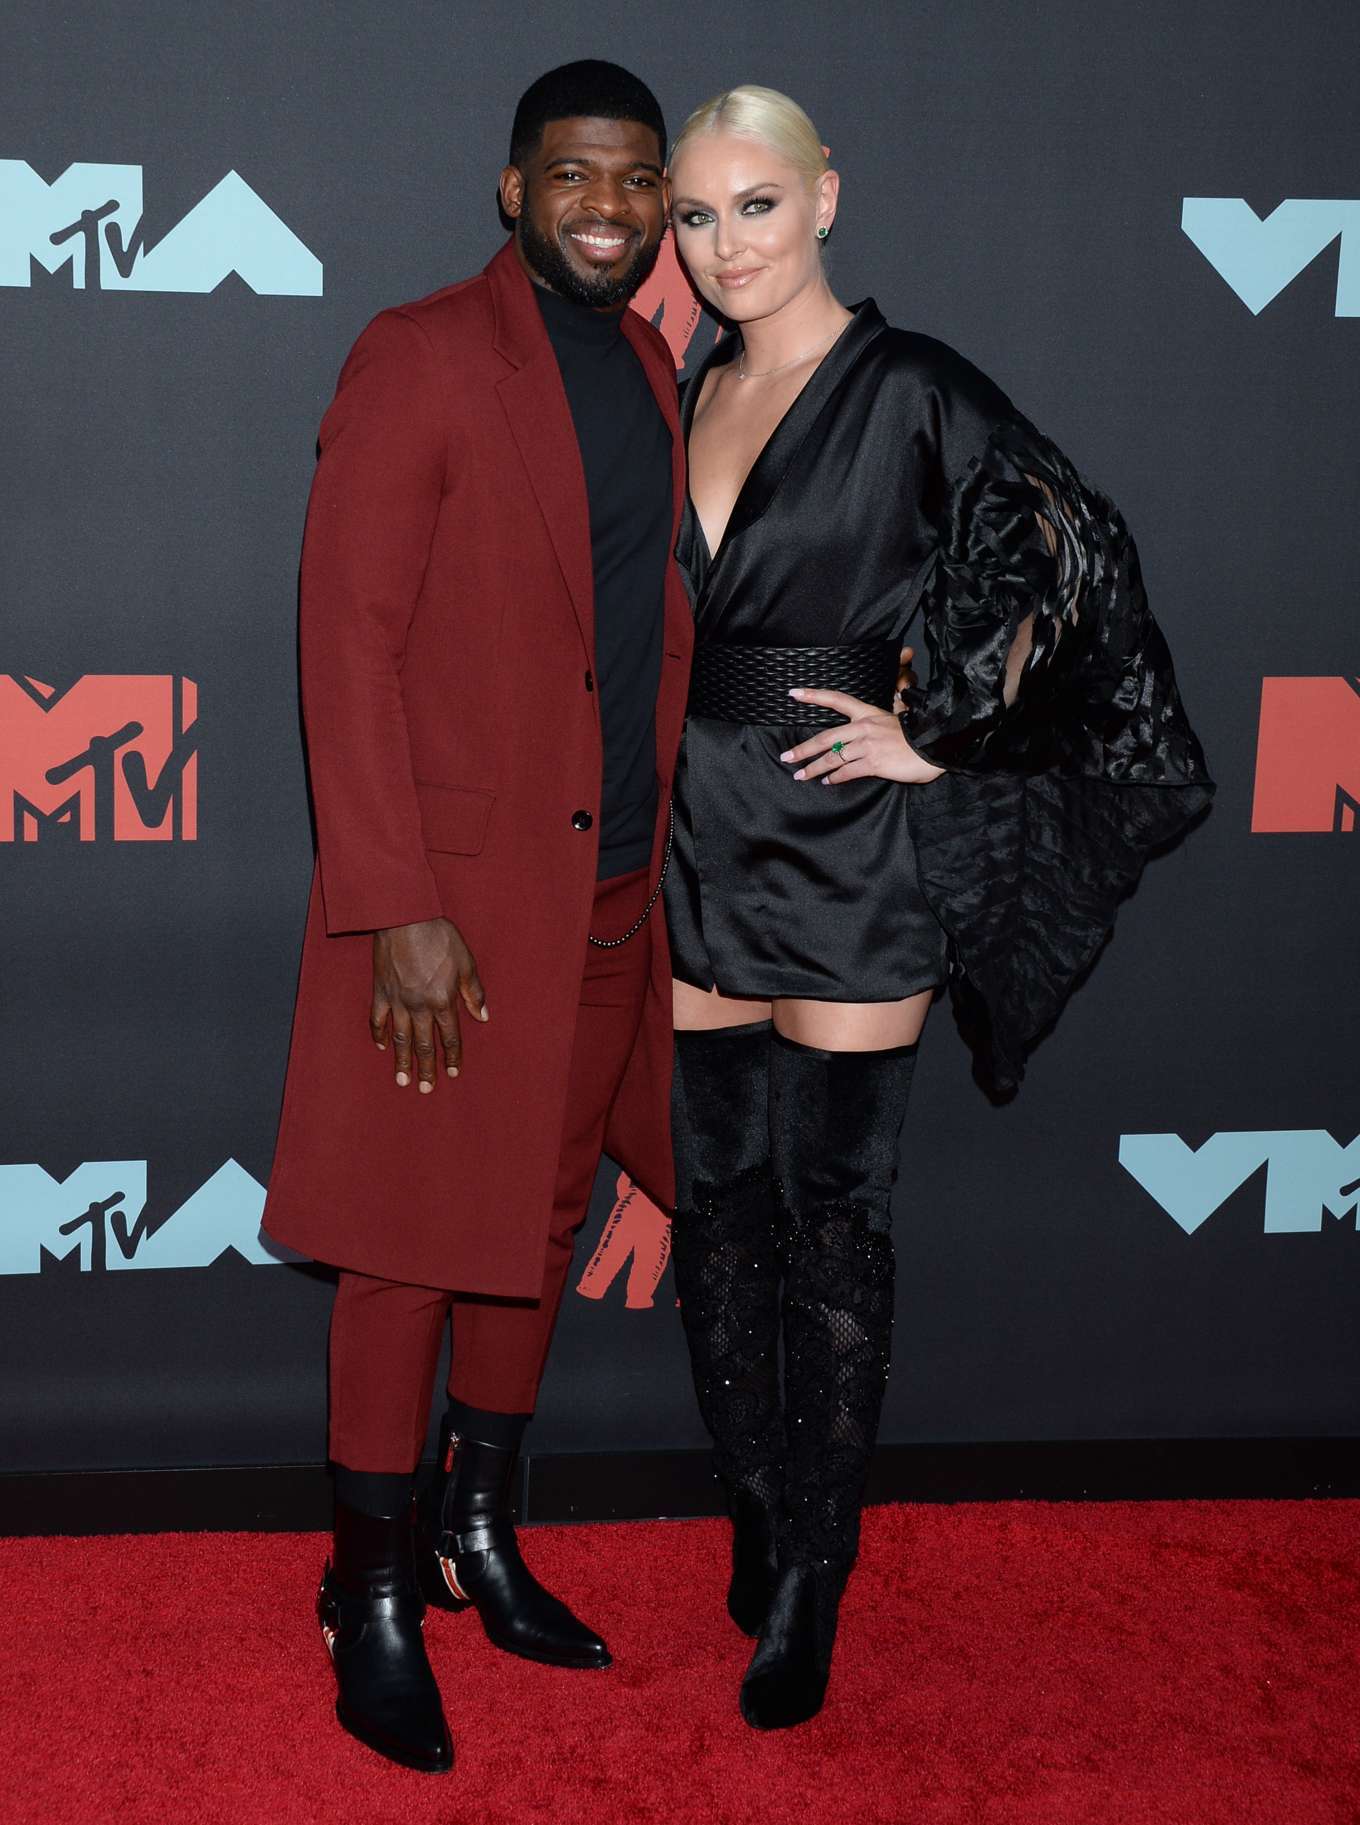 Lindsey Vonn â€“ 2019 MTV Video Music Awards at Prudential Center in New Jersey